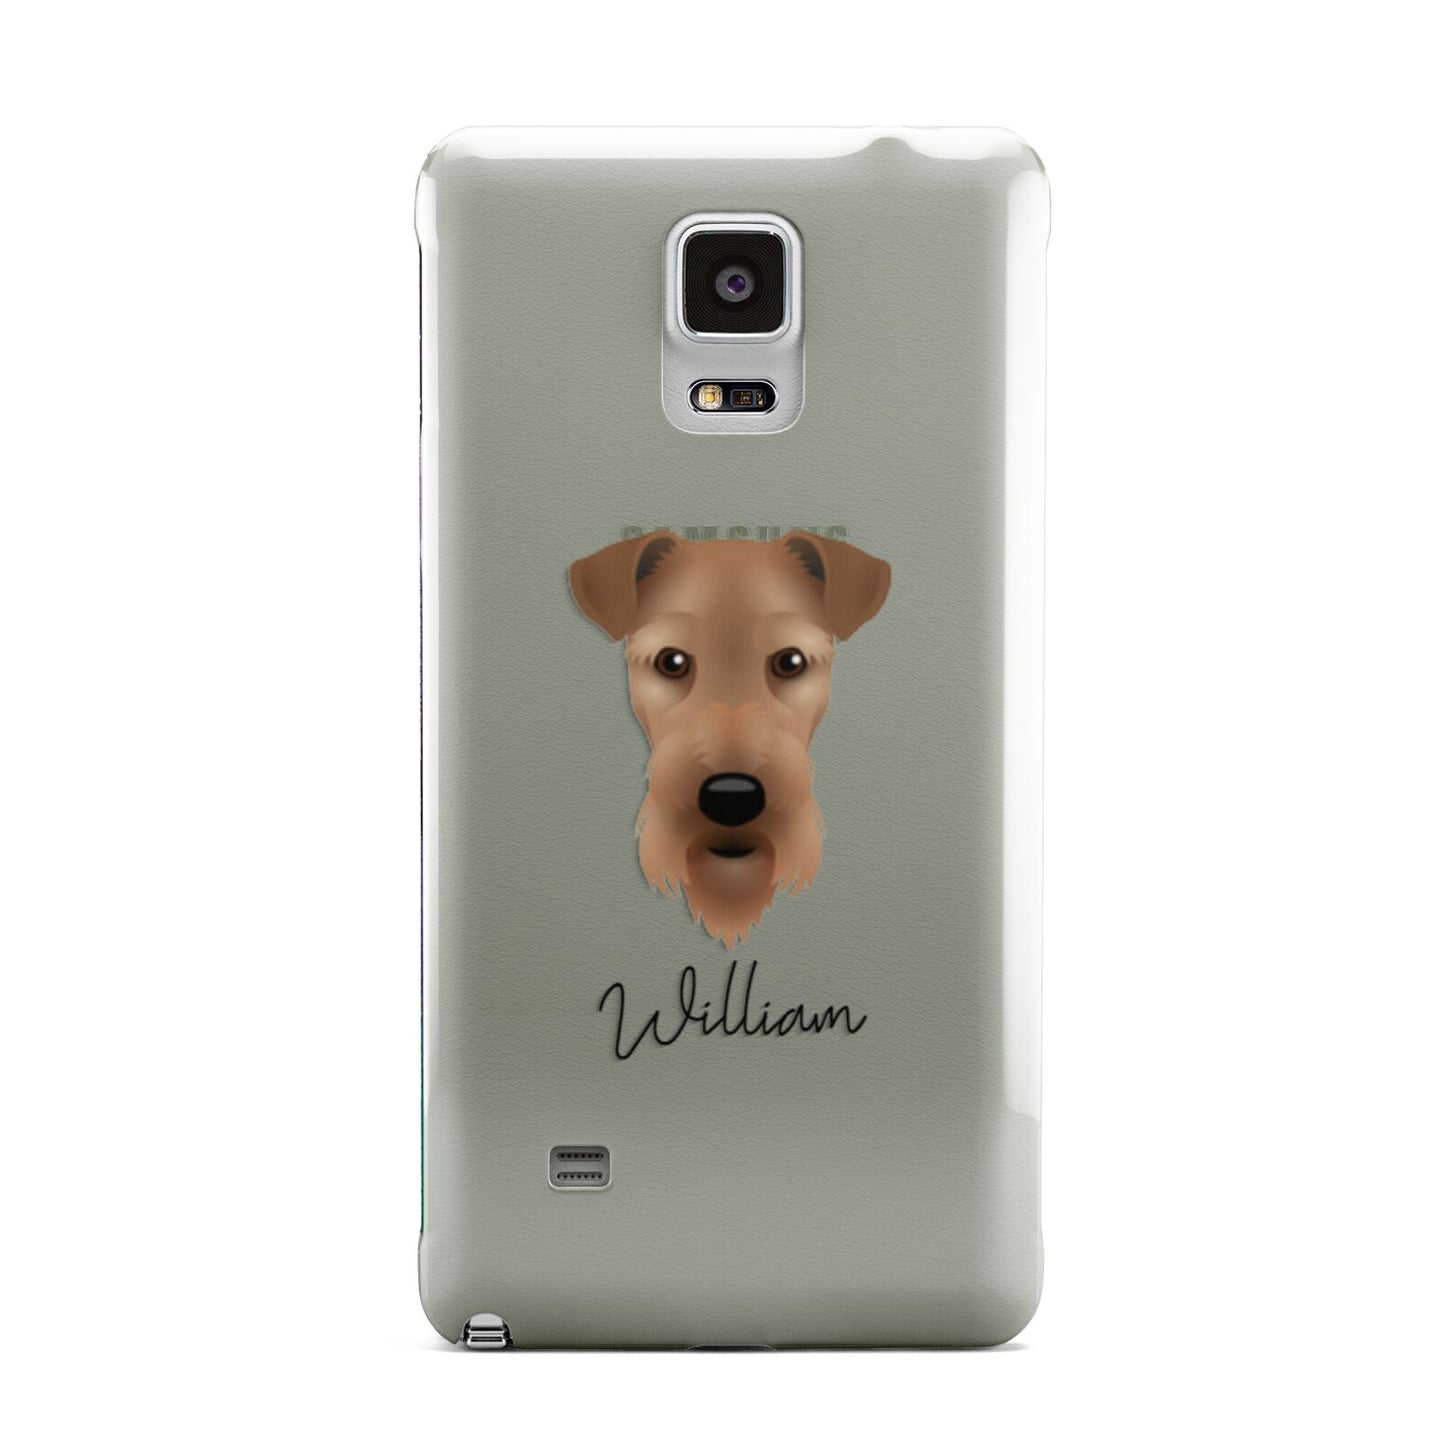 Airedale Terrier Personalised Samsung Galaxy Note 4 Case